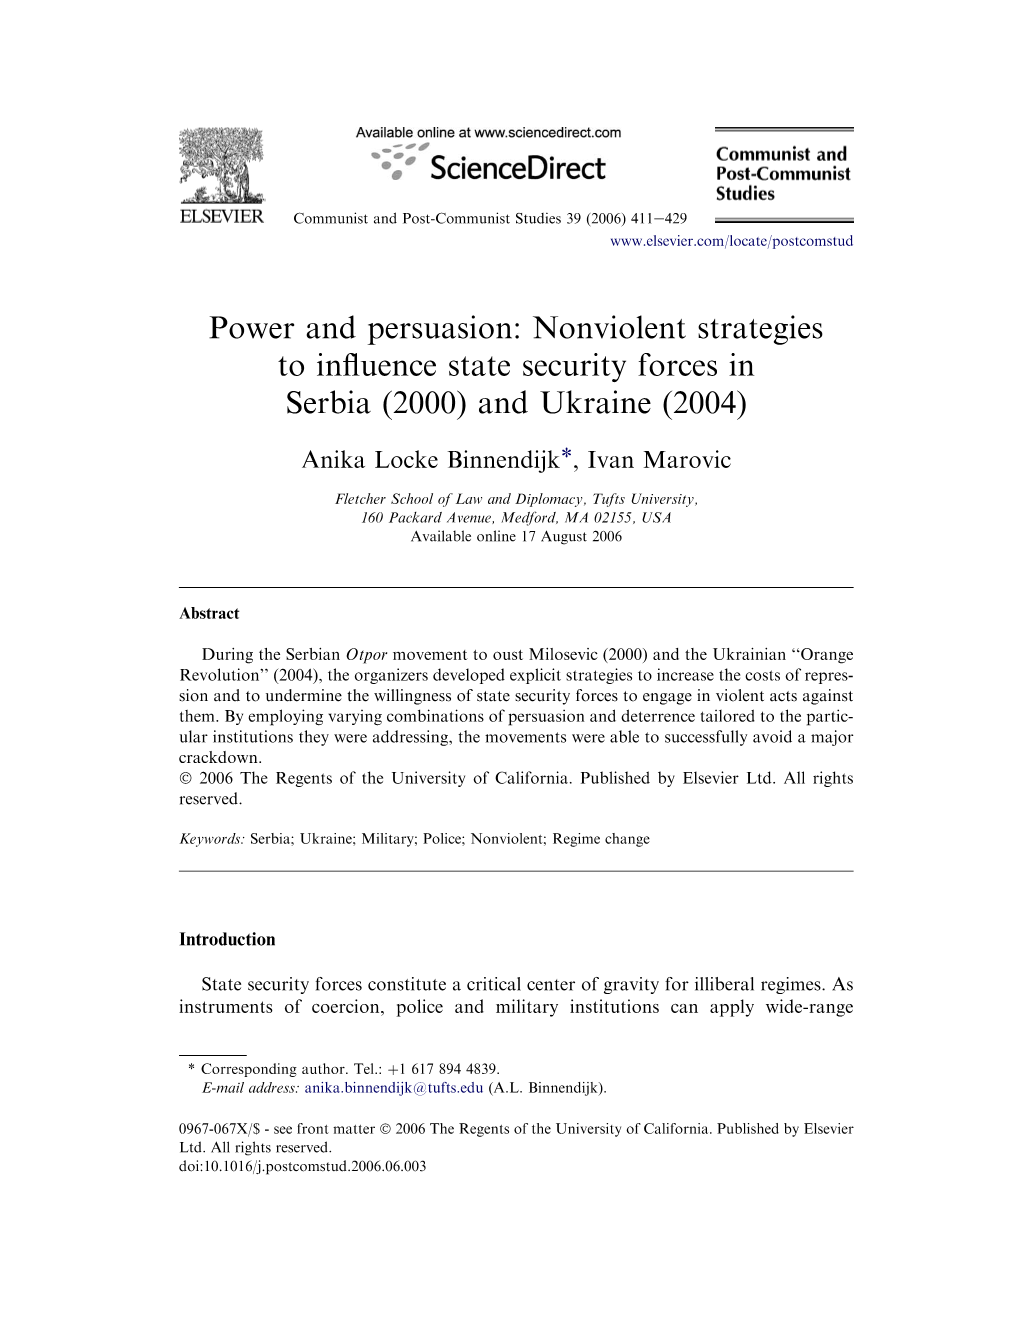 Nonviolent Strategies to Influence State Security Forces in Serbia